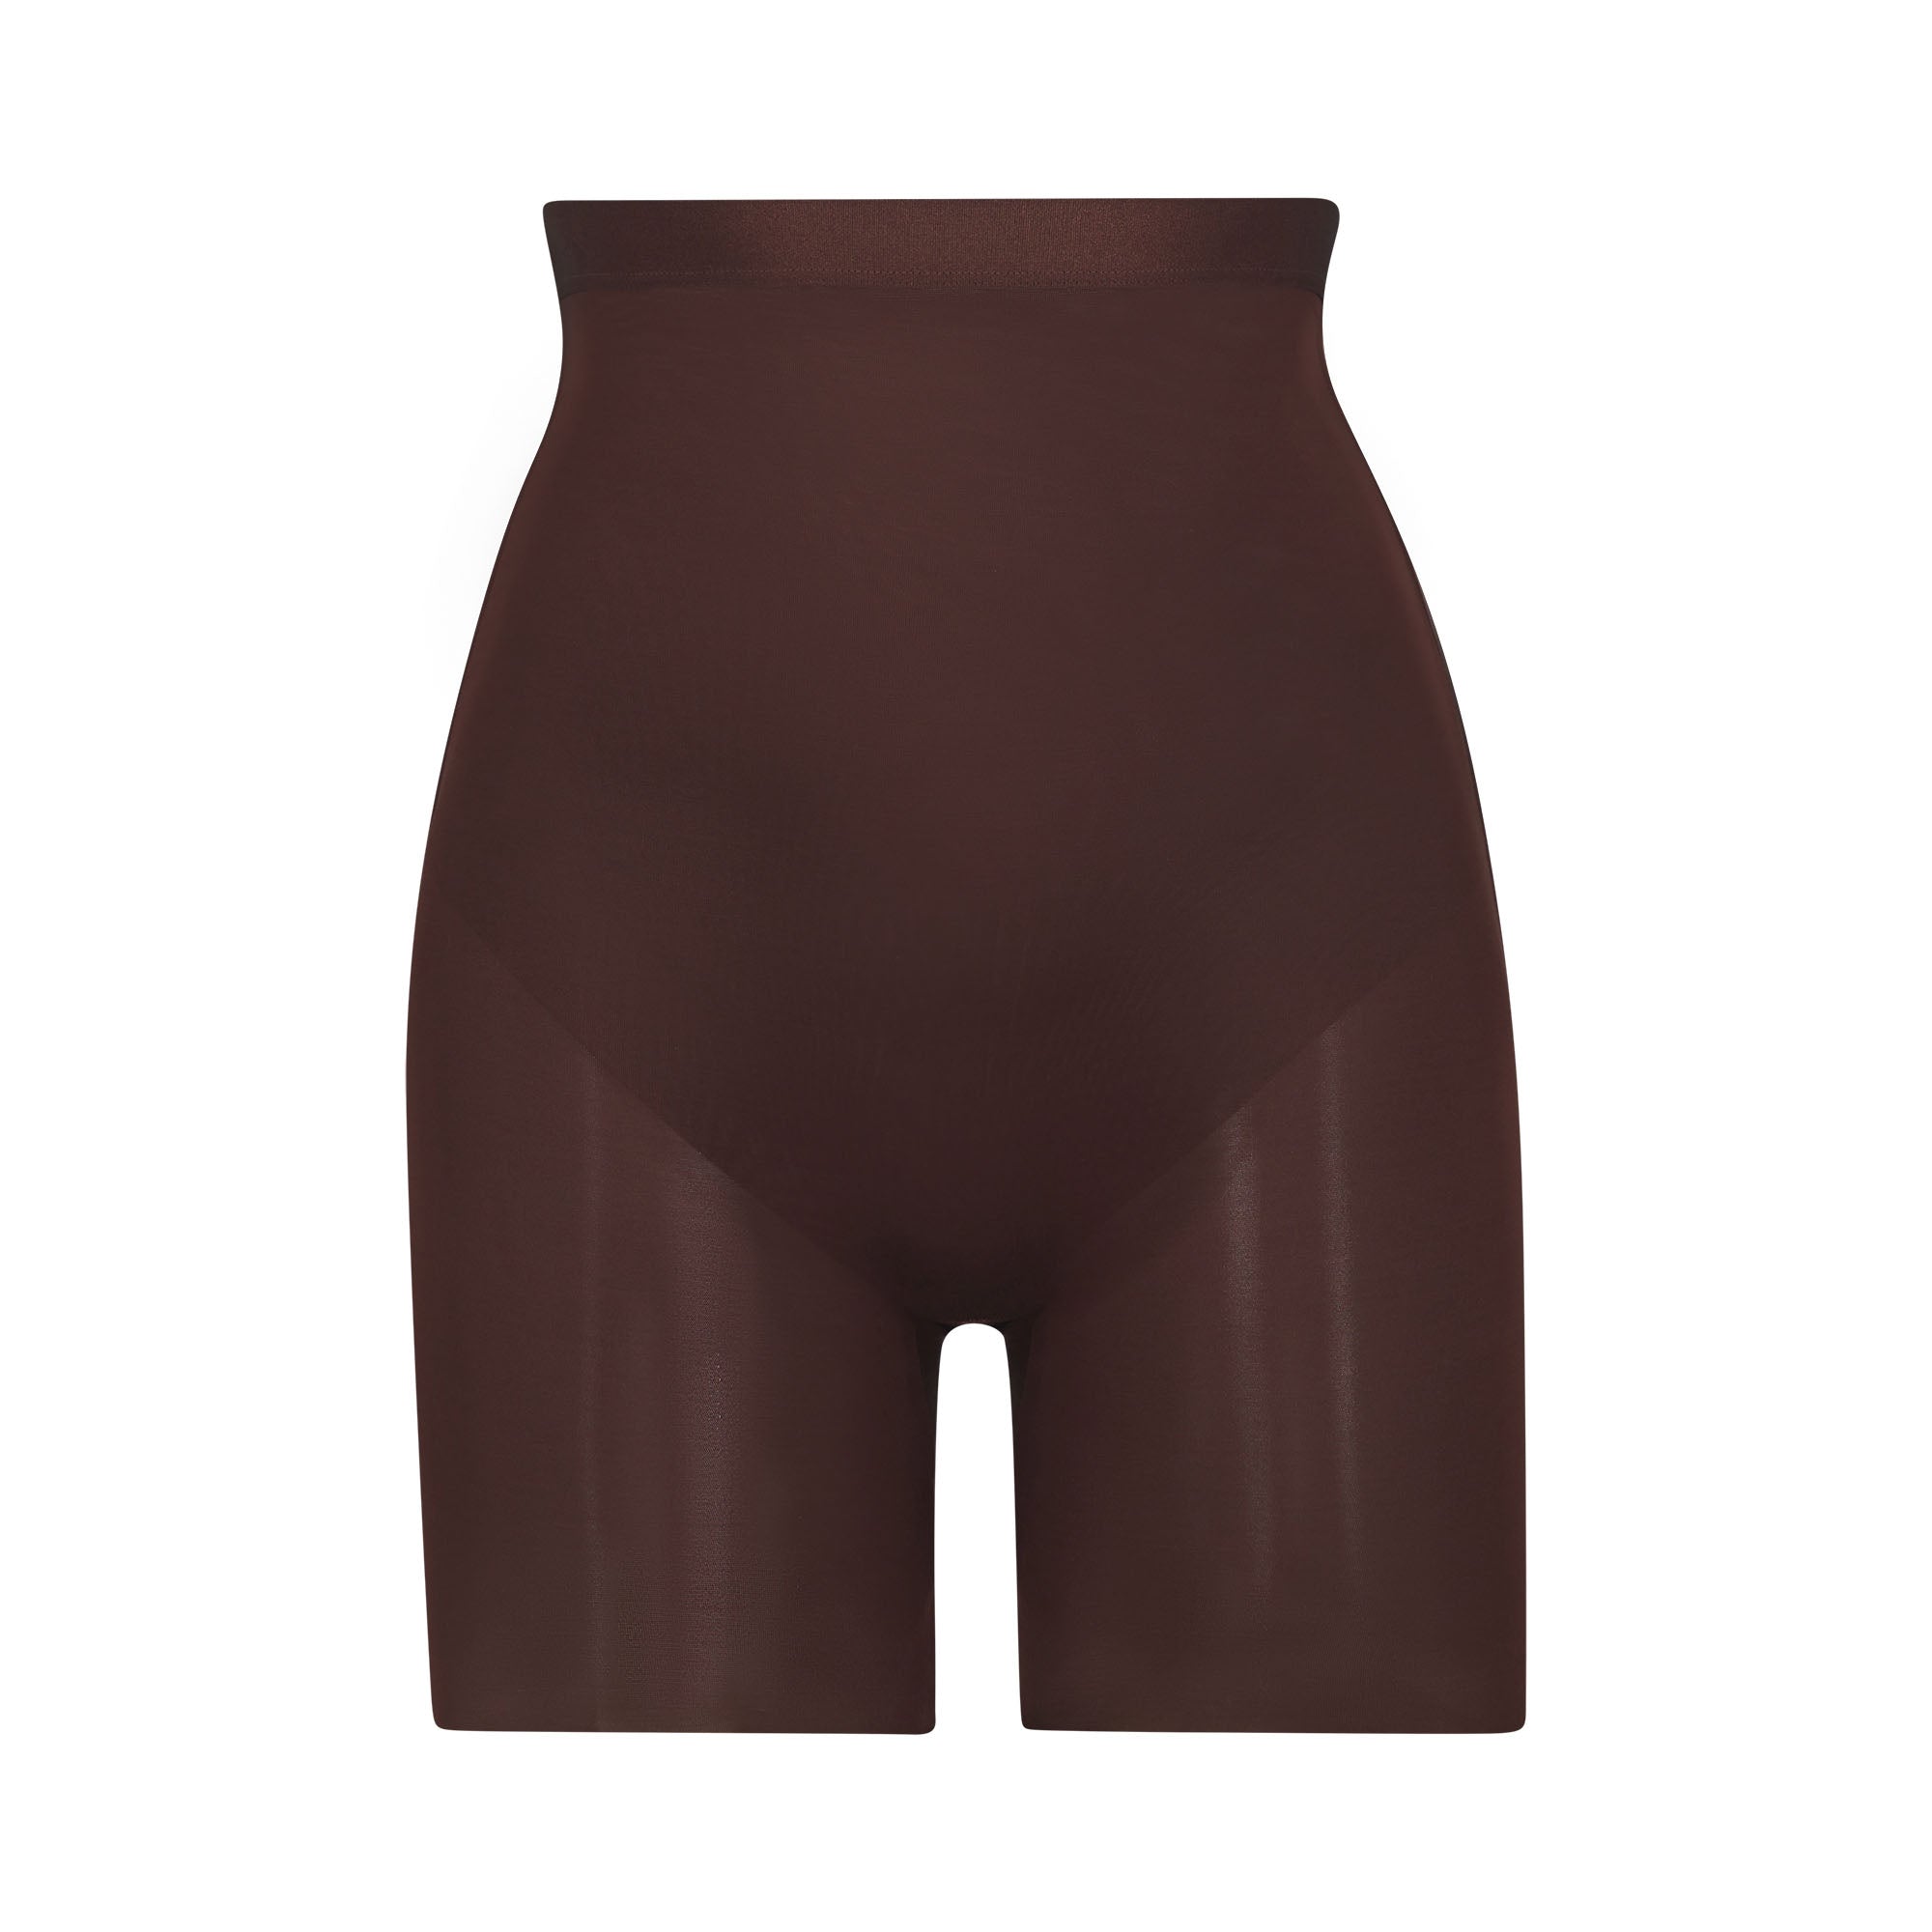 Barely There Low Back Short - Cocoa